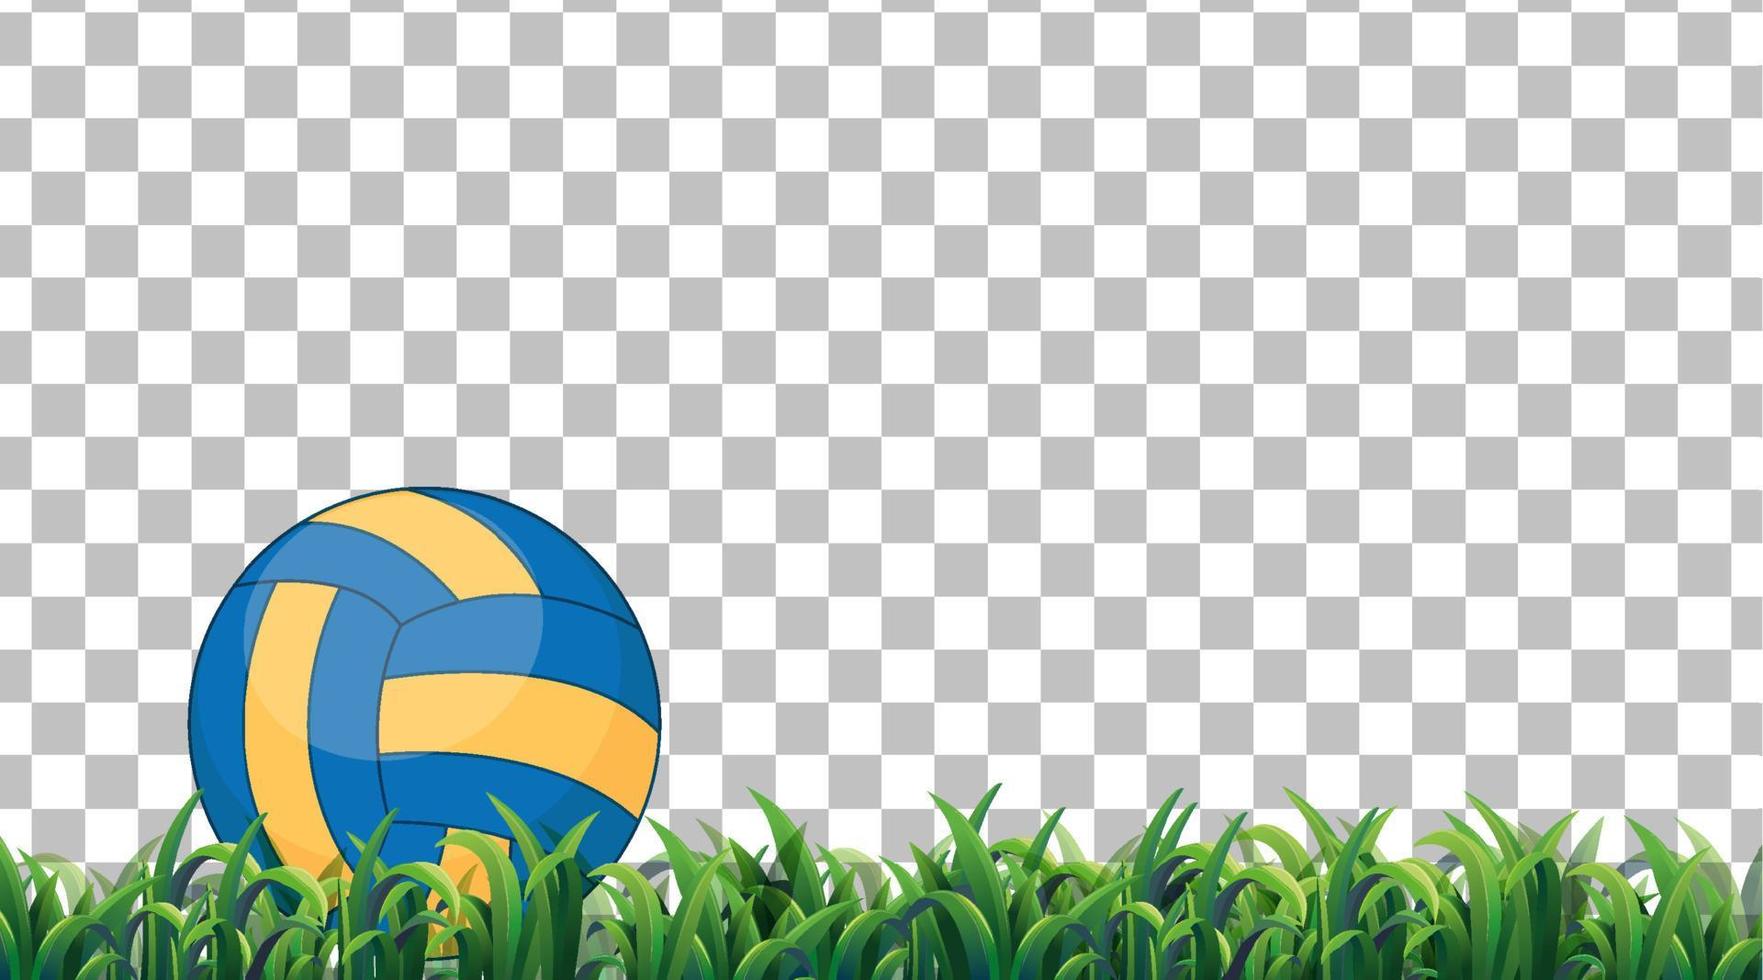 Volleyball on the grass field on grid background vector